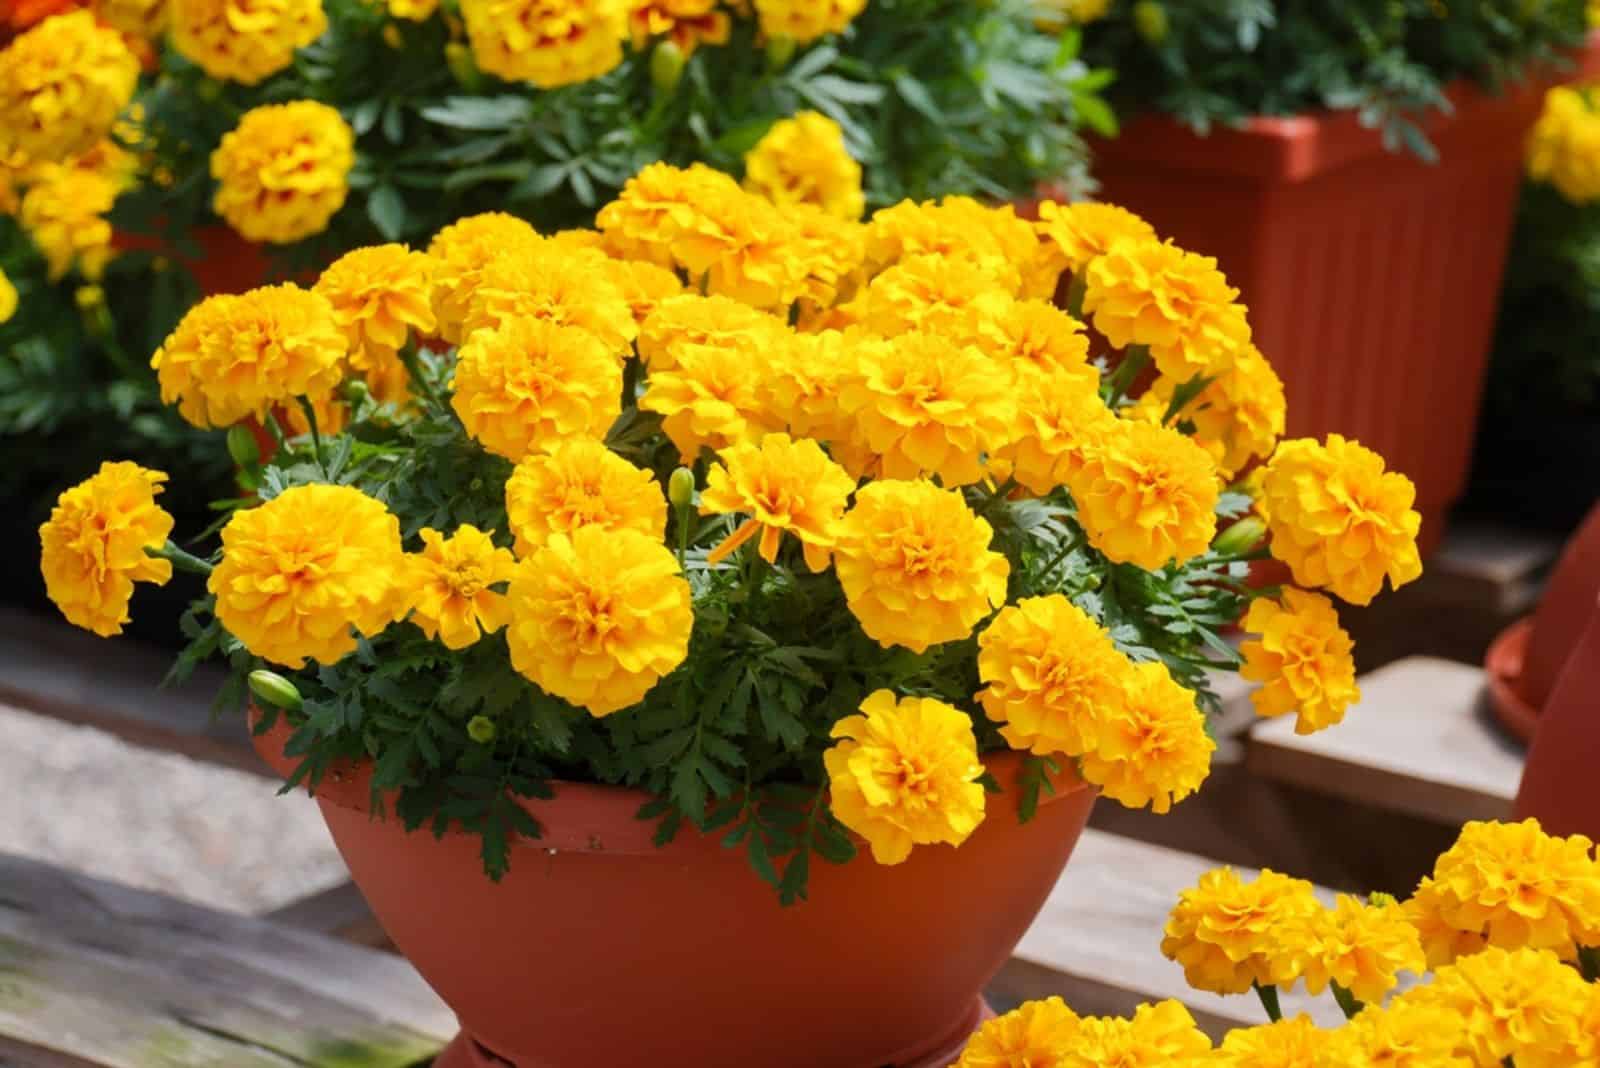 Marigolds in a brown pot